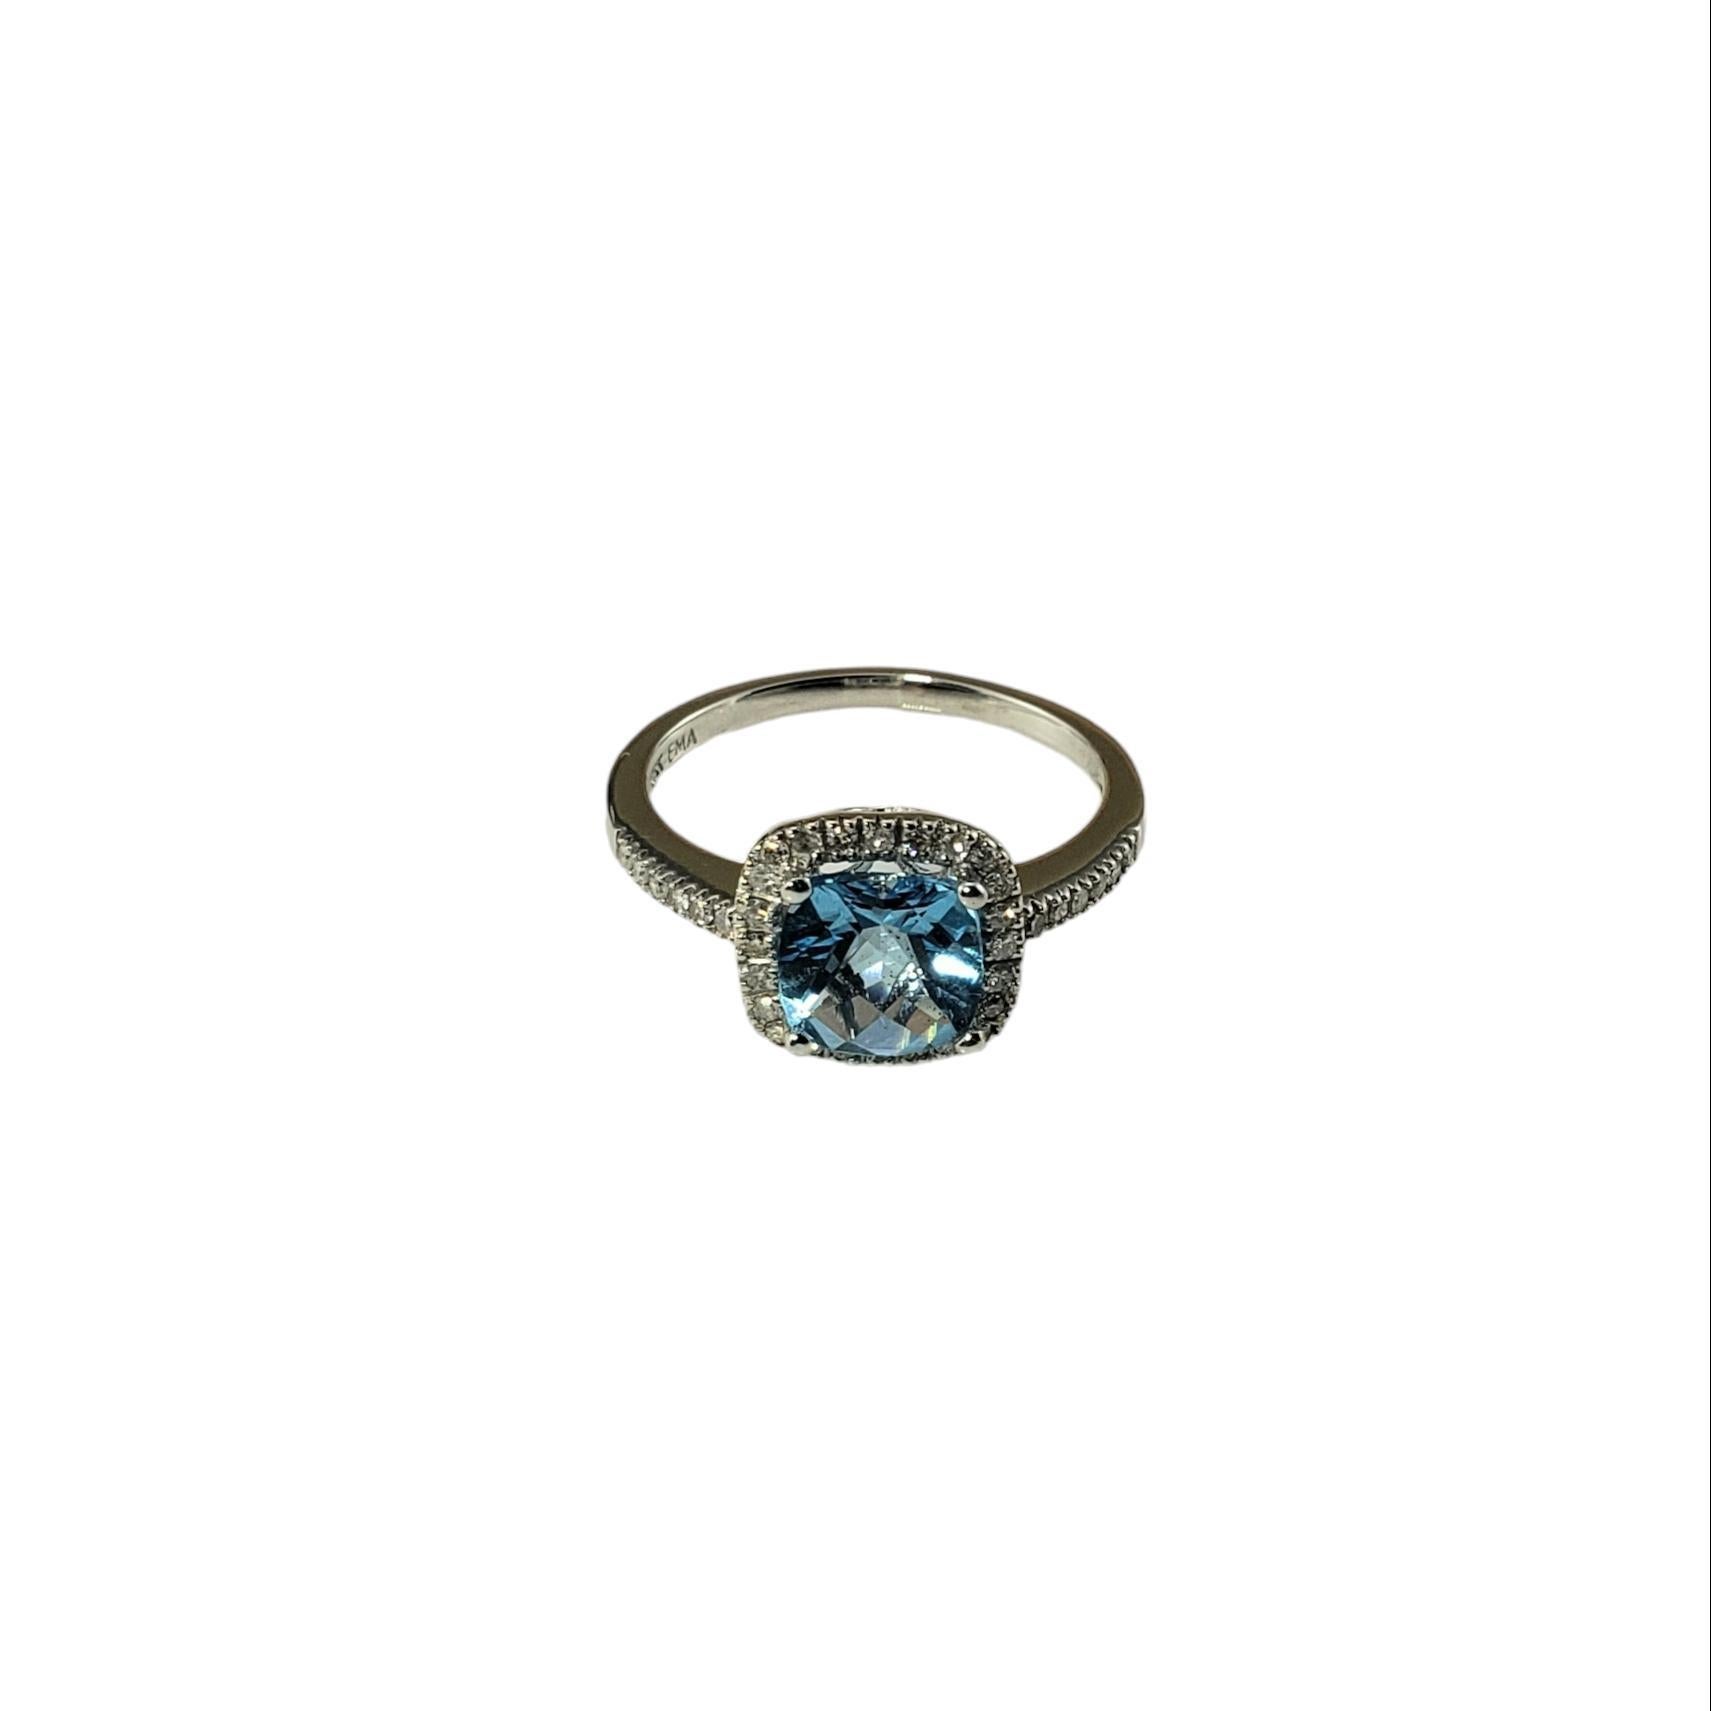 Vintage 14 Karat White Gold Blue Topaz and Diamond Ring Size 6.25-

This elegant ring features one blue topaz (7 mm x 7 mm) surrounded by 36 round single cut diamonds set in classic 14K white gold.  Width: 10 mm.  
Shank: 1.5 mm.

Approximate total